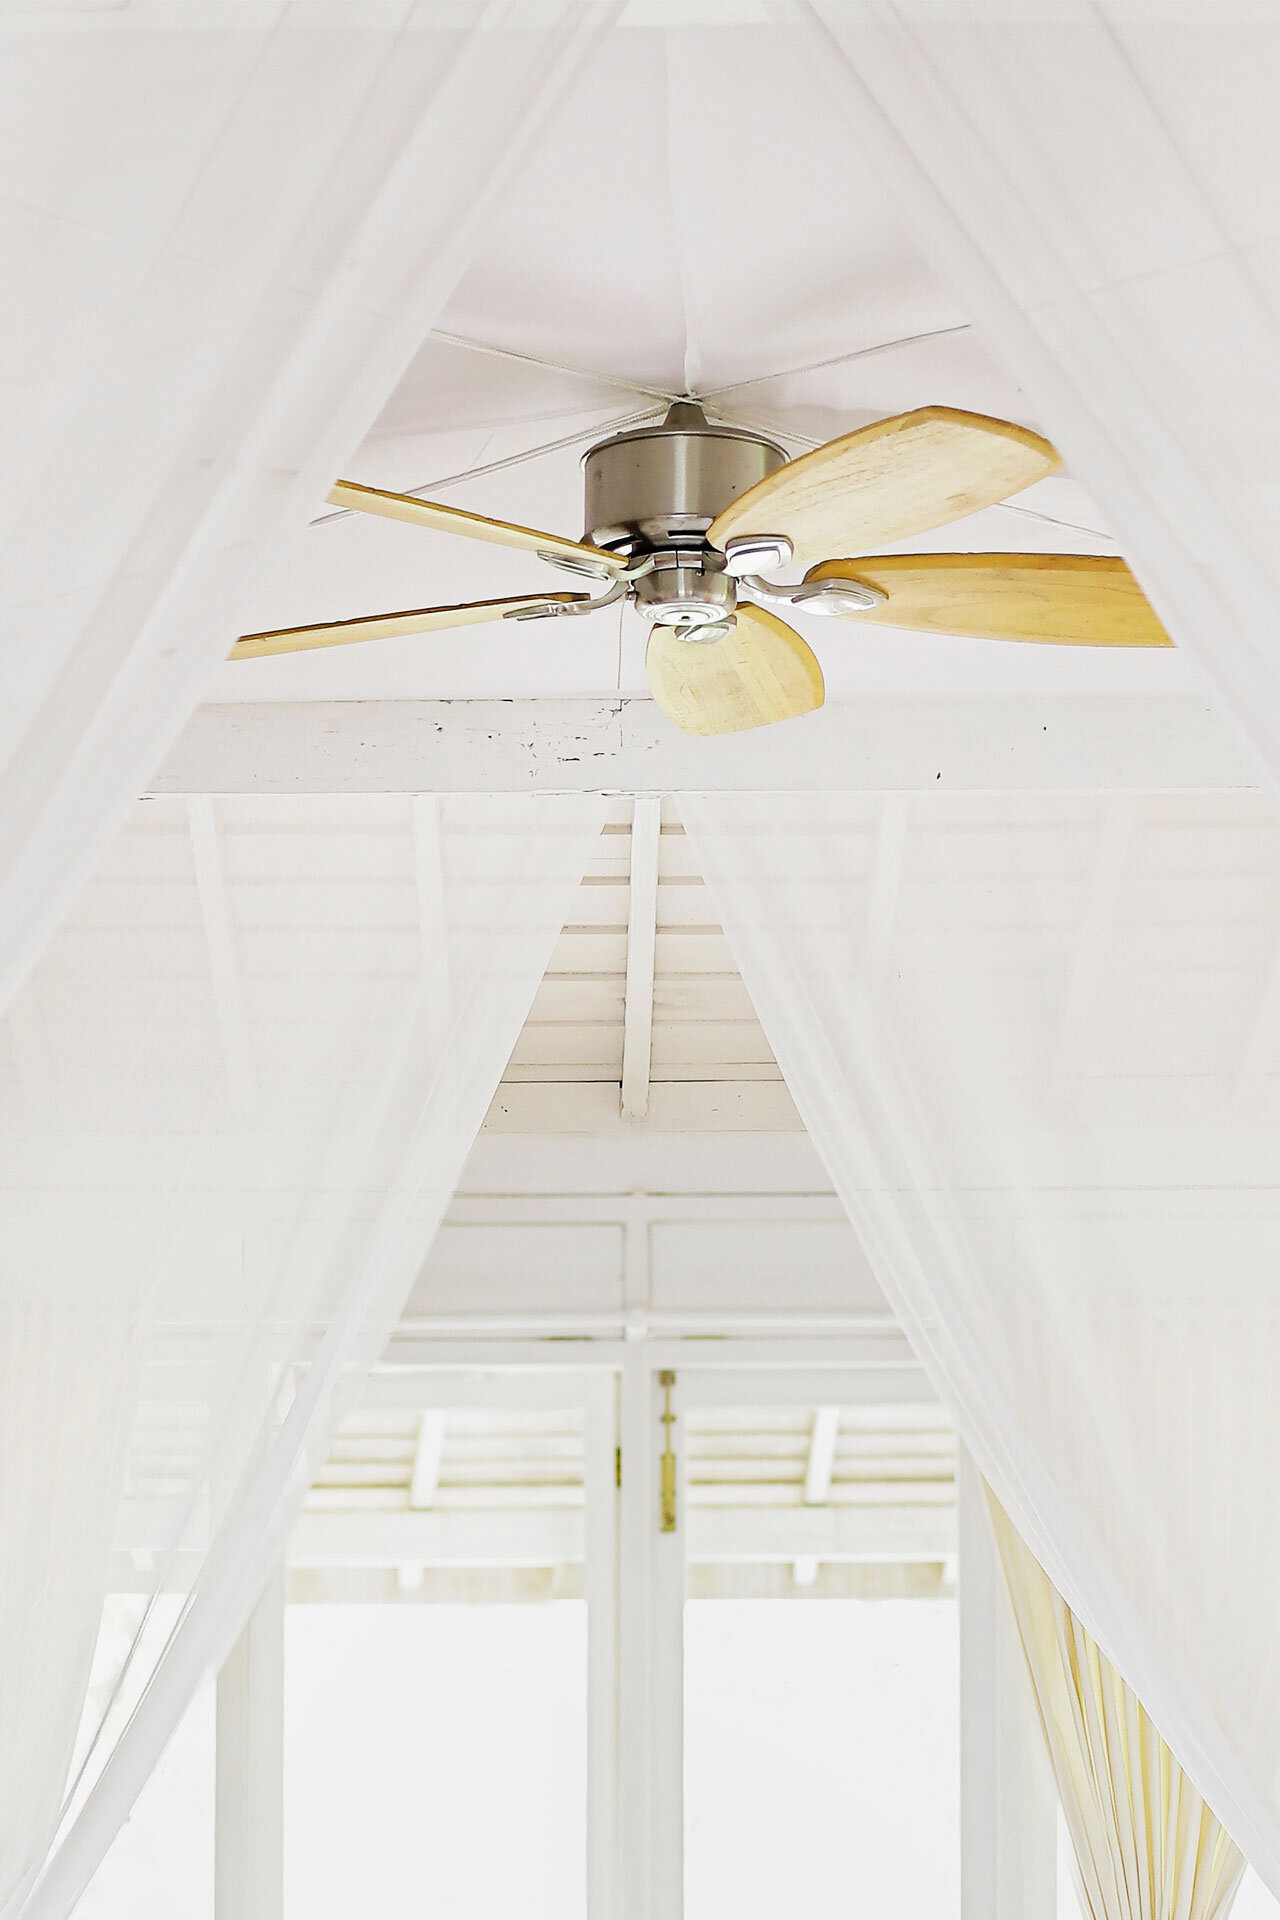 Air Conditioning Vs Ceiling Fans